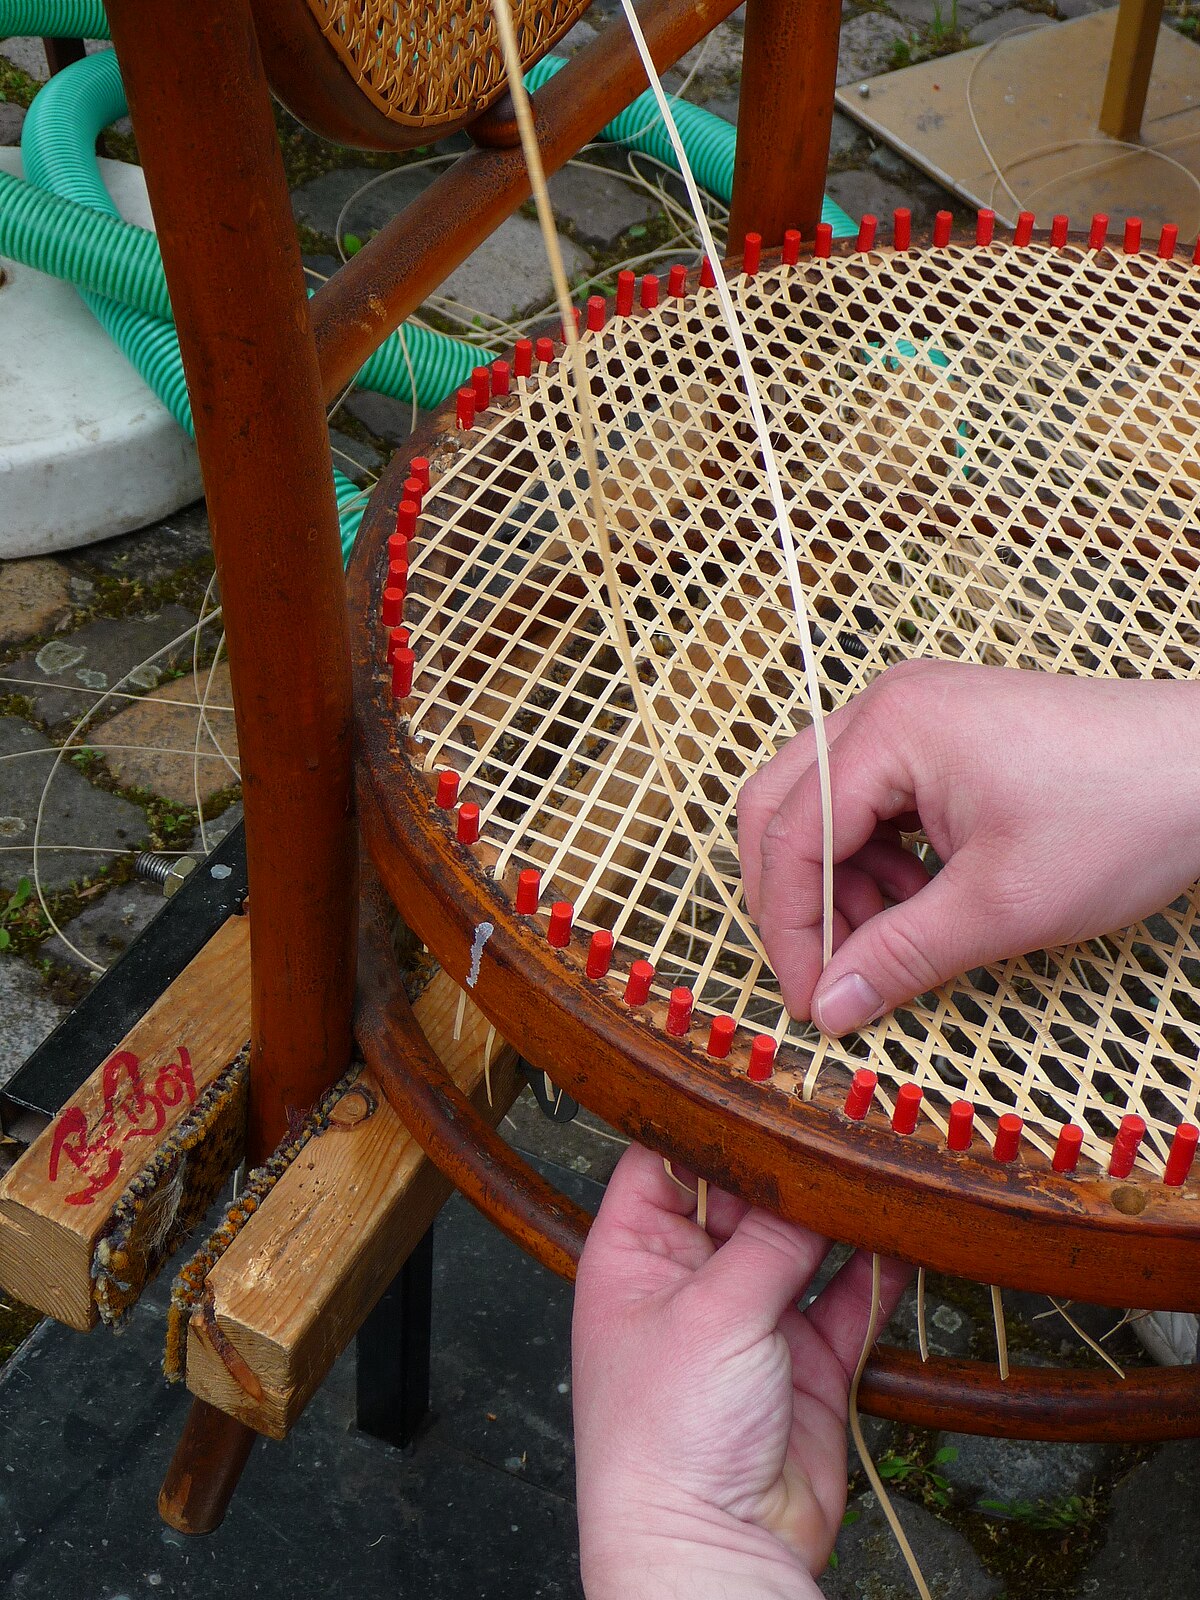 Chair Caning Instructions - Basic Chair Design